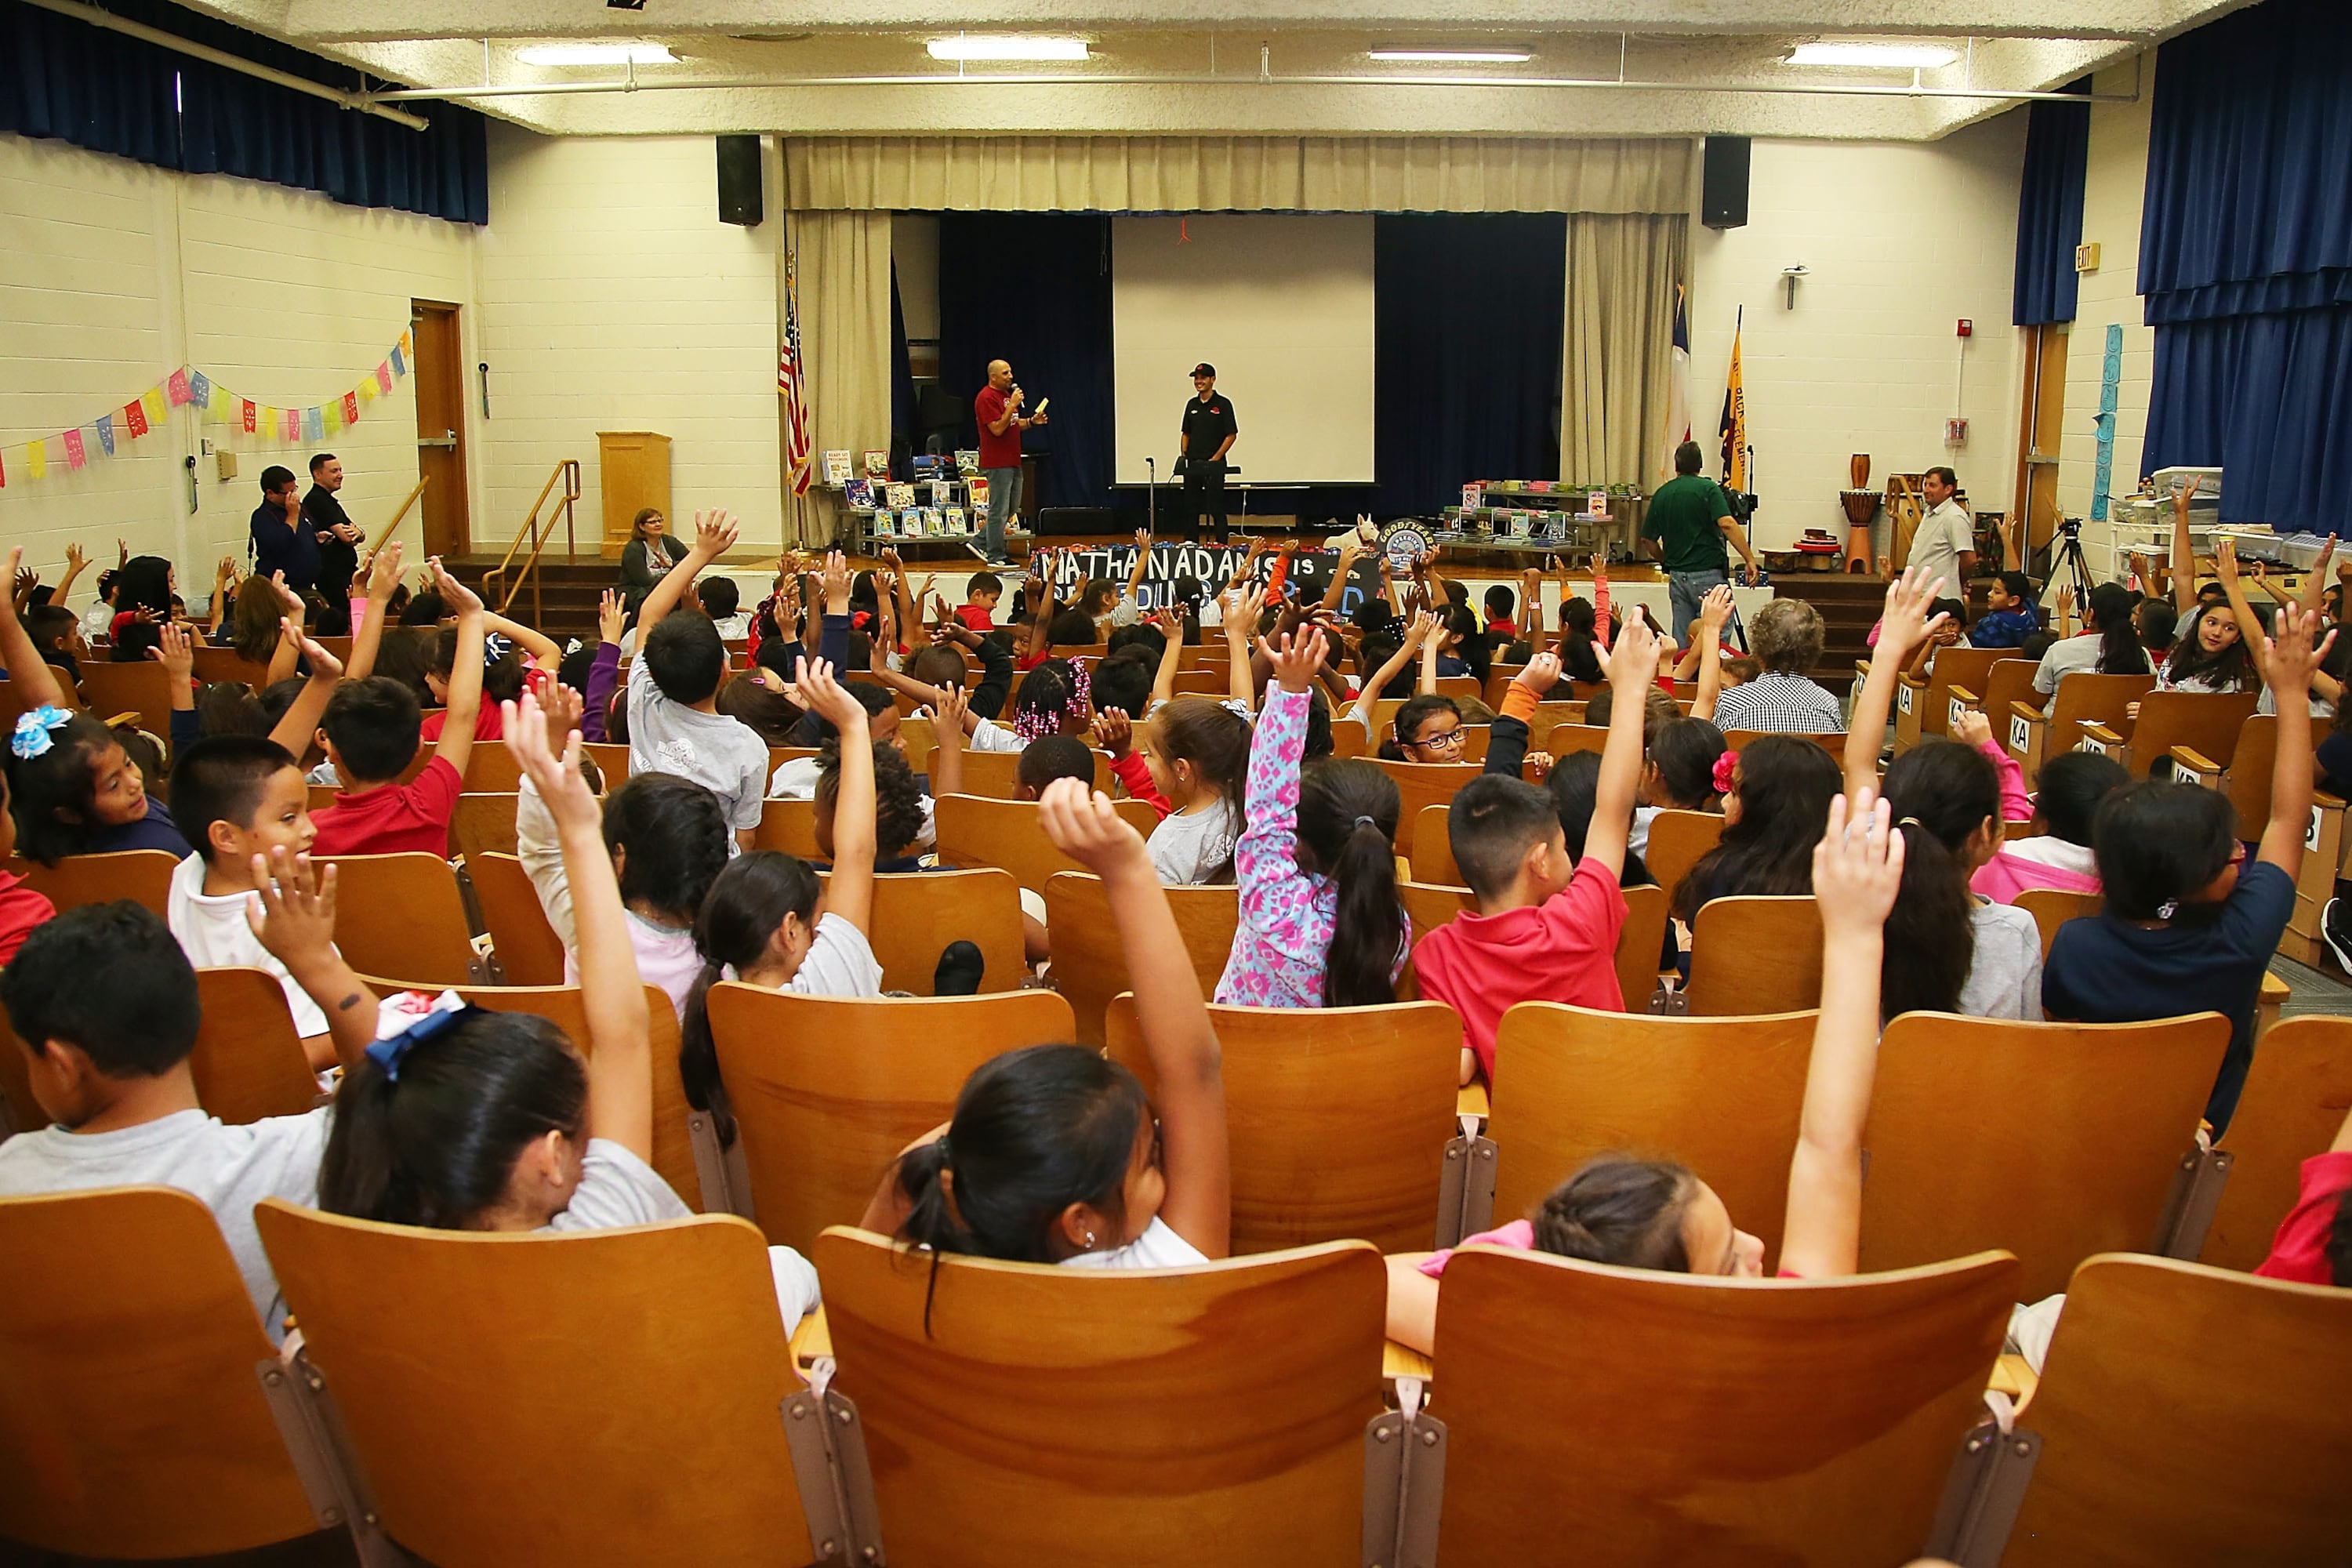 Dallas elementary school students raise their hands at an event in 2016.